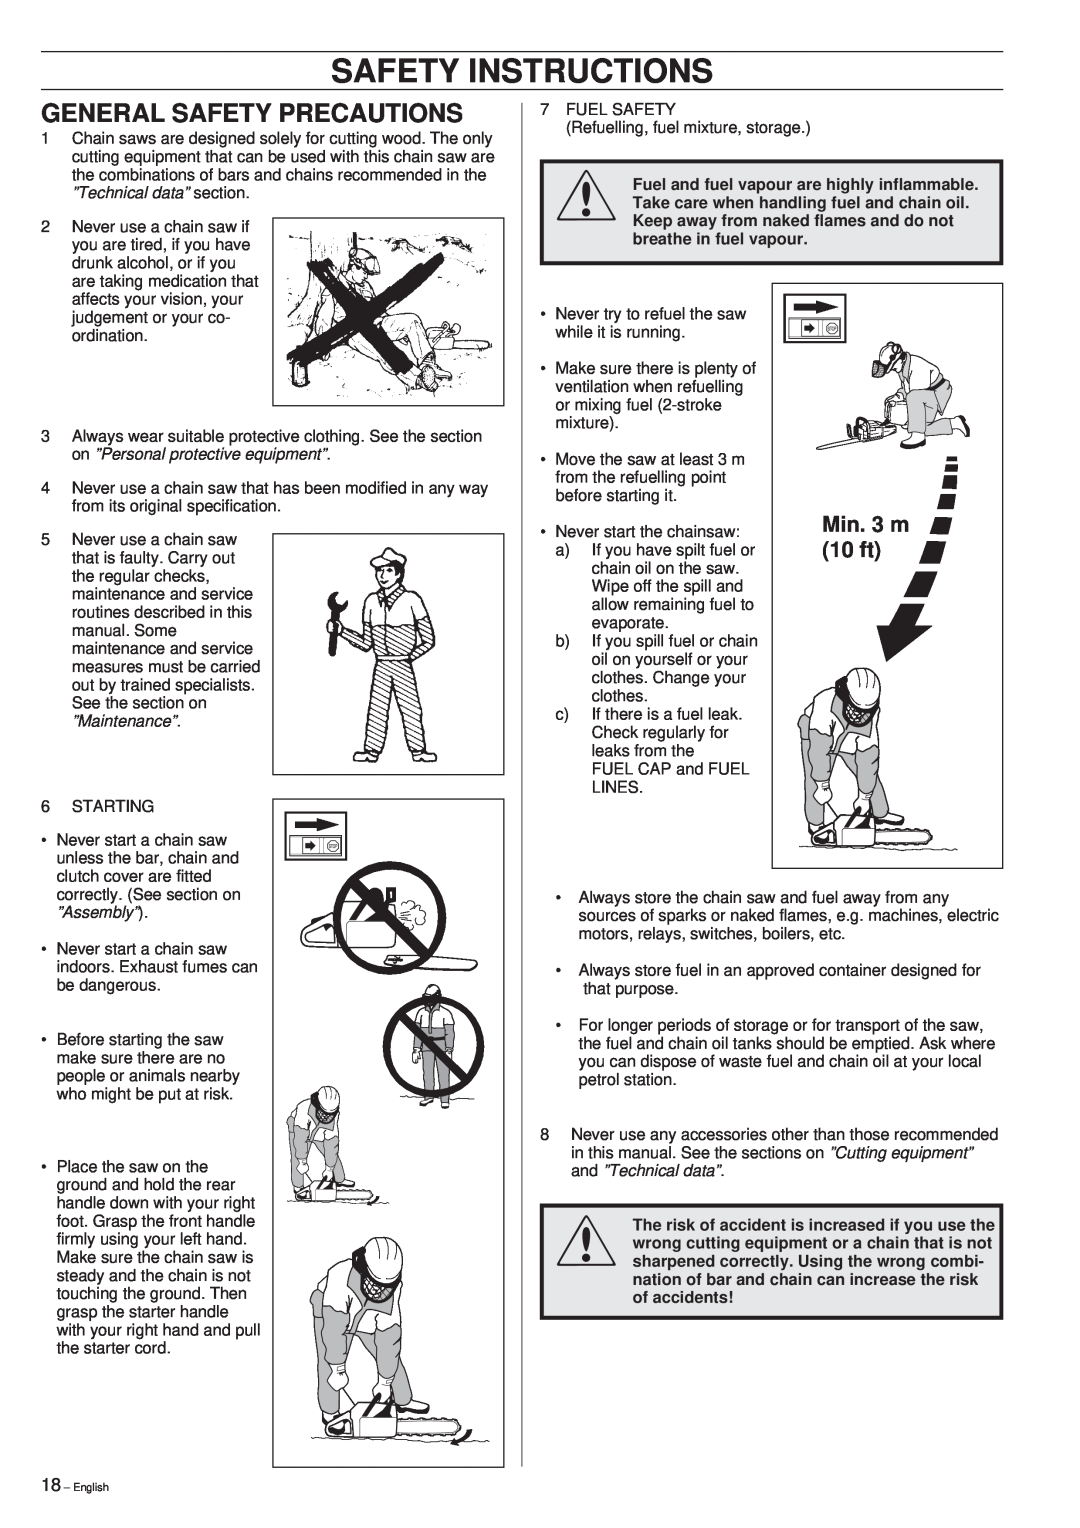 Husqvarna 45 manual Safety Instructions, Min. 3 m, 10 ft, ”Technical data” section, on ”Personal protective equipment” 